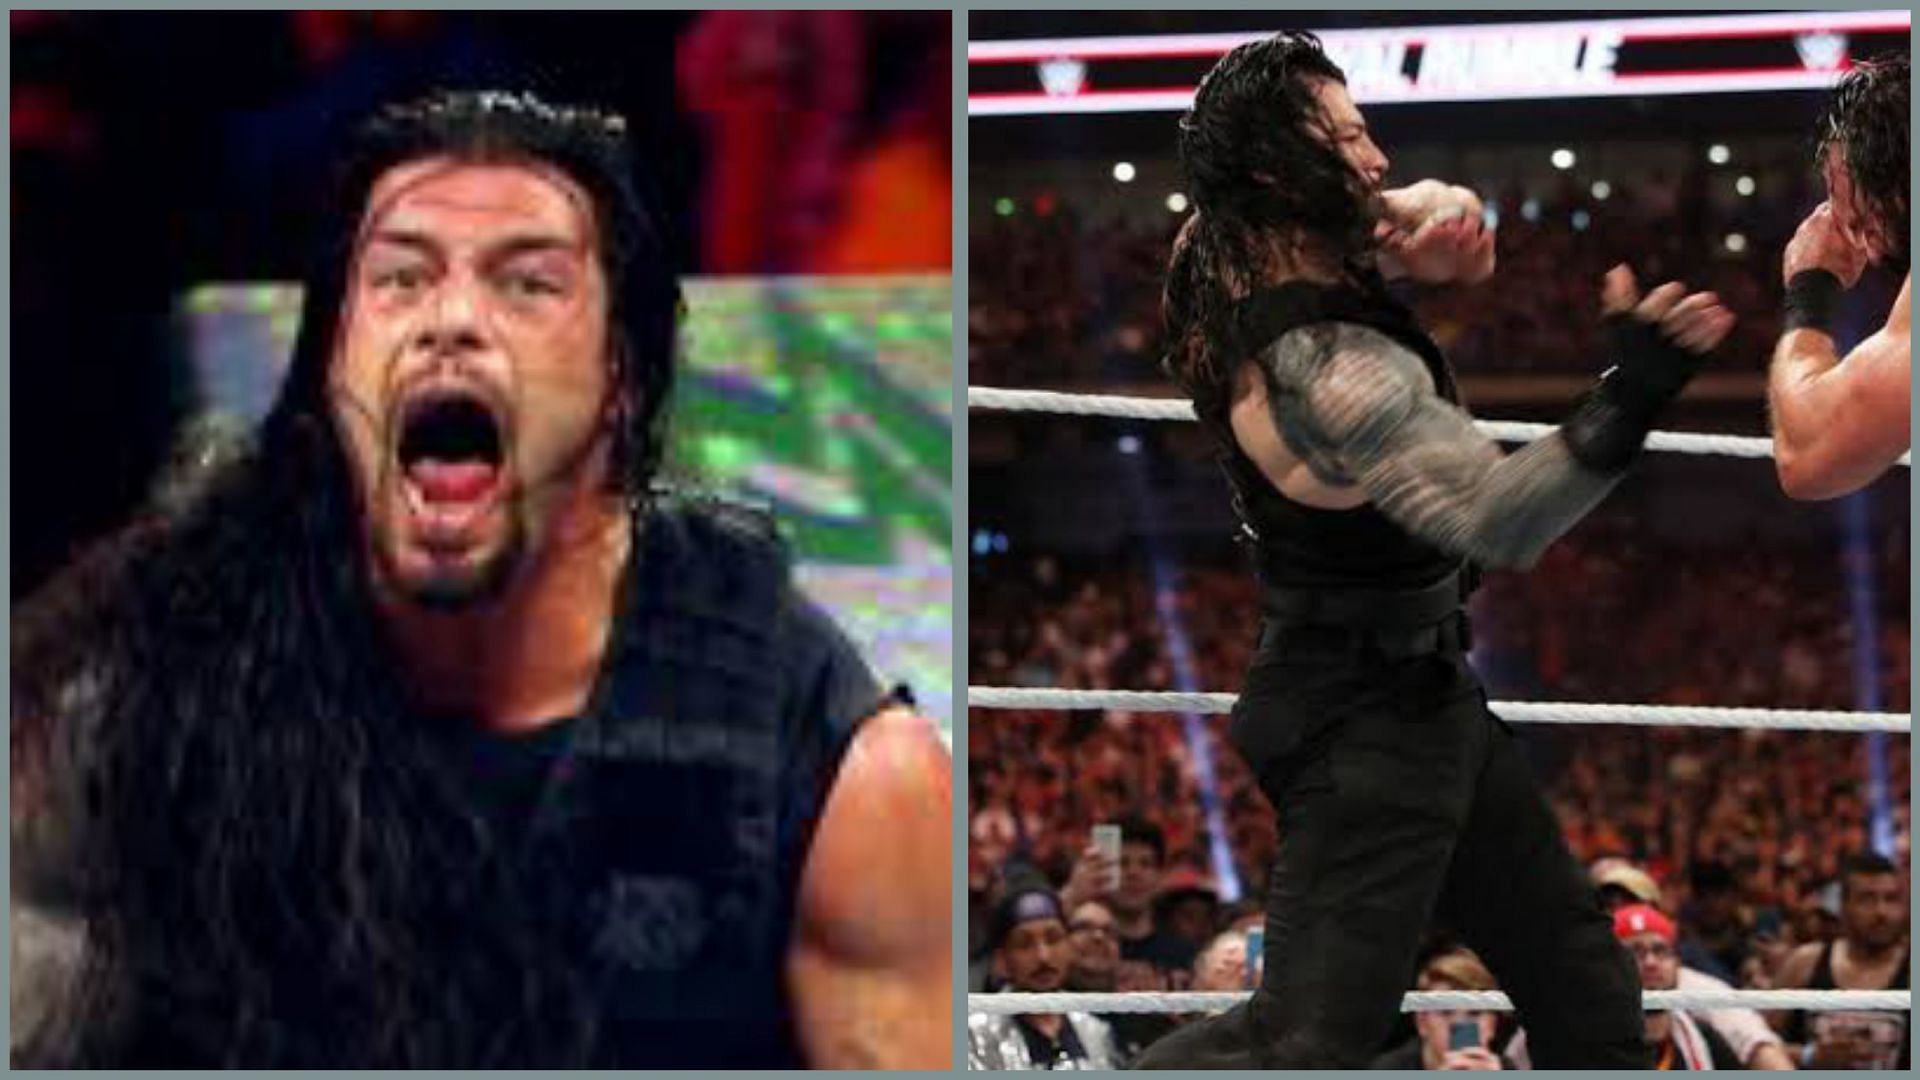 Roman Reigns has entered the Royal Rumble match a total of 6 times.